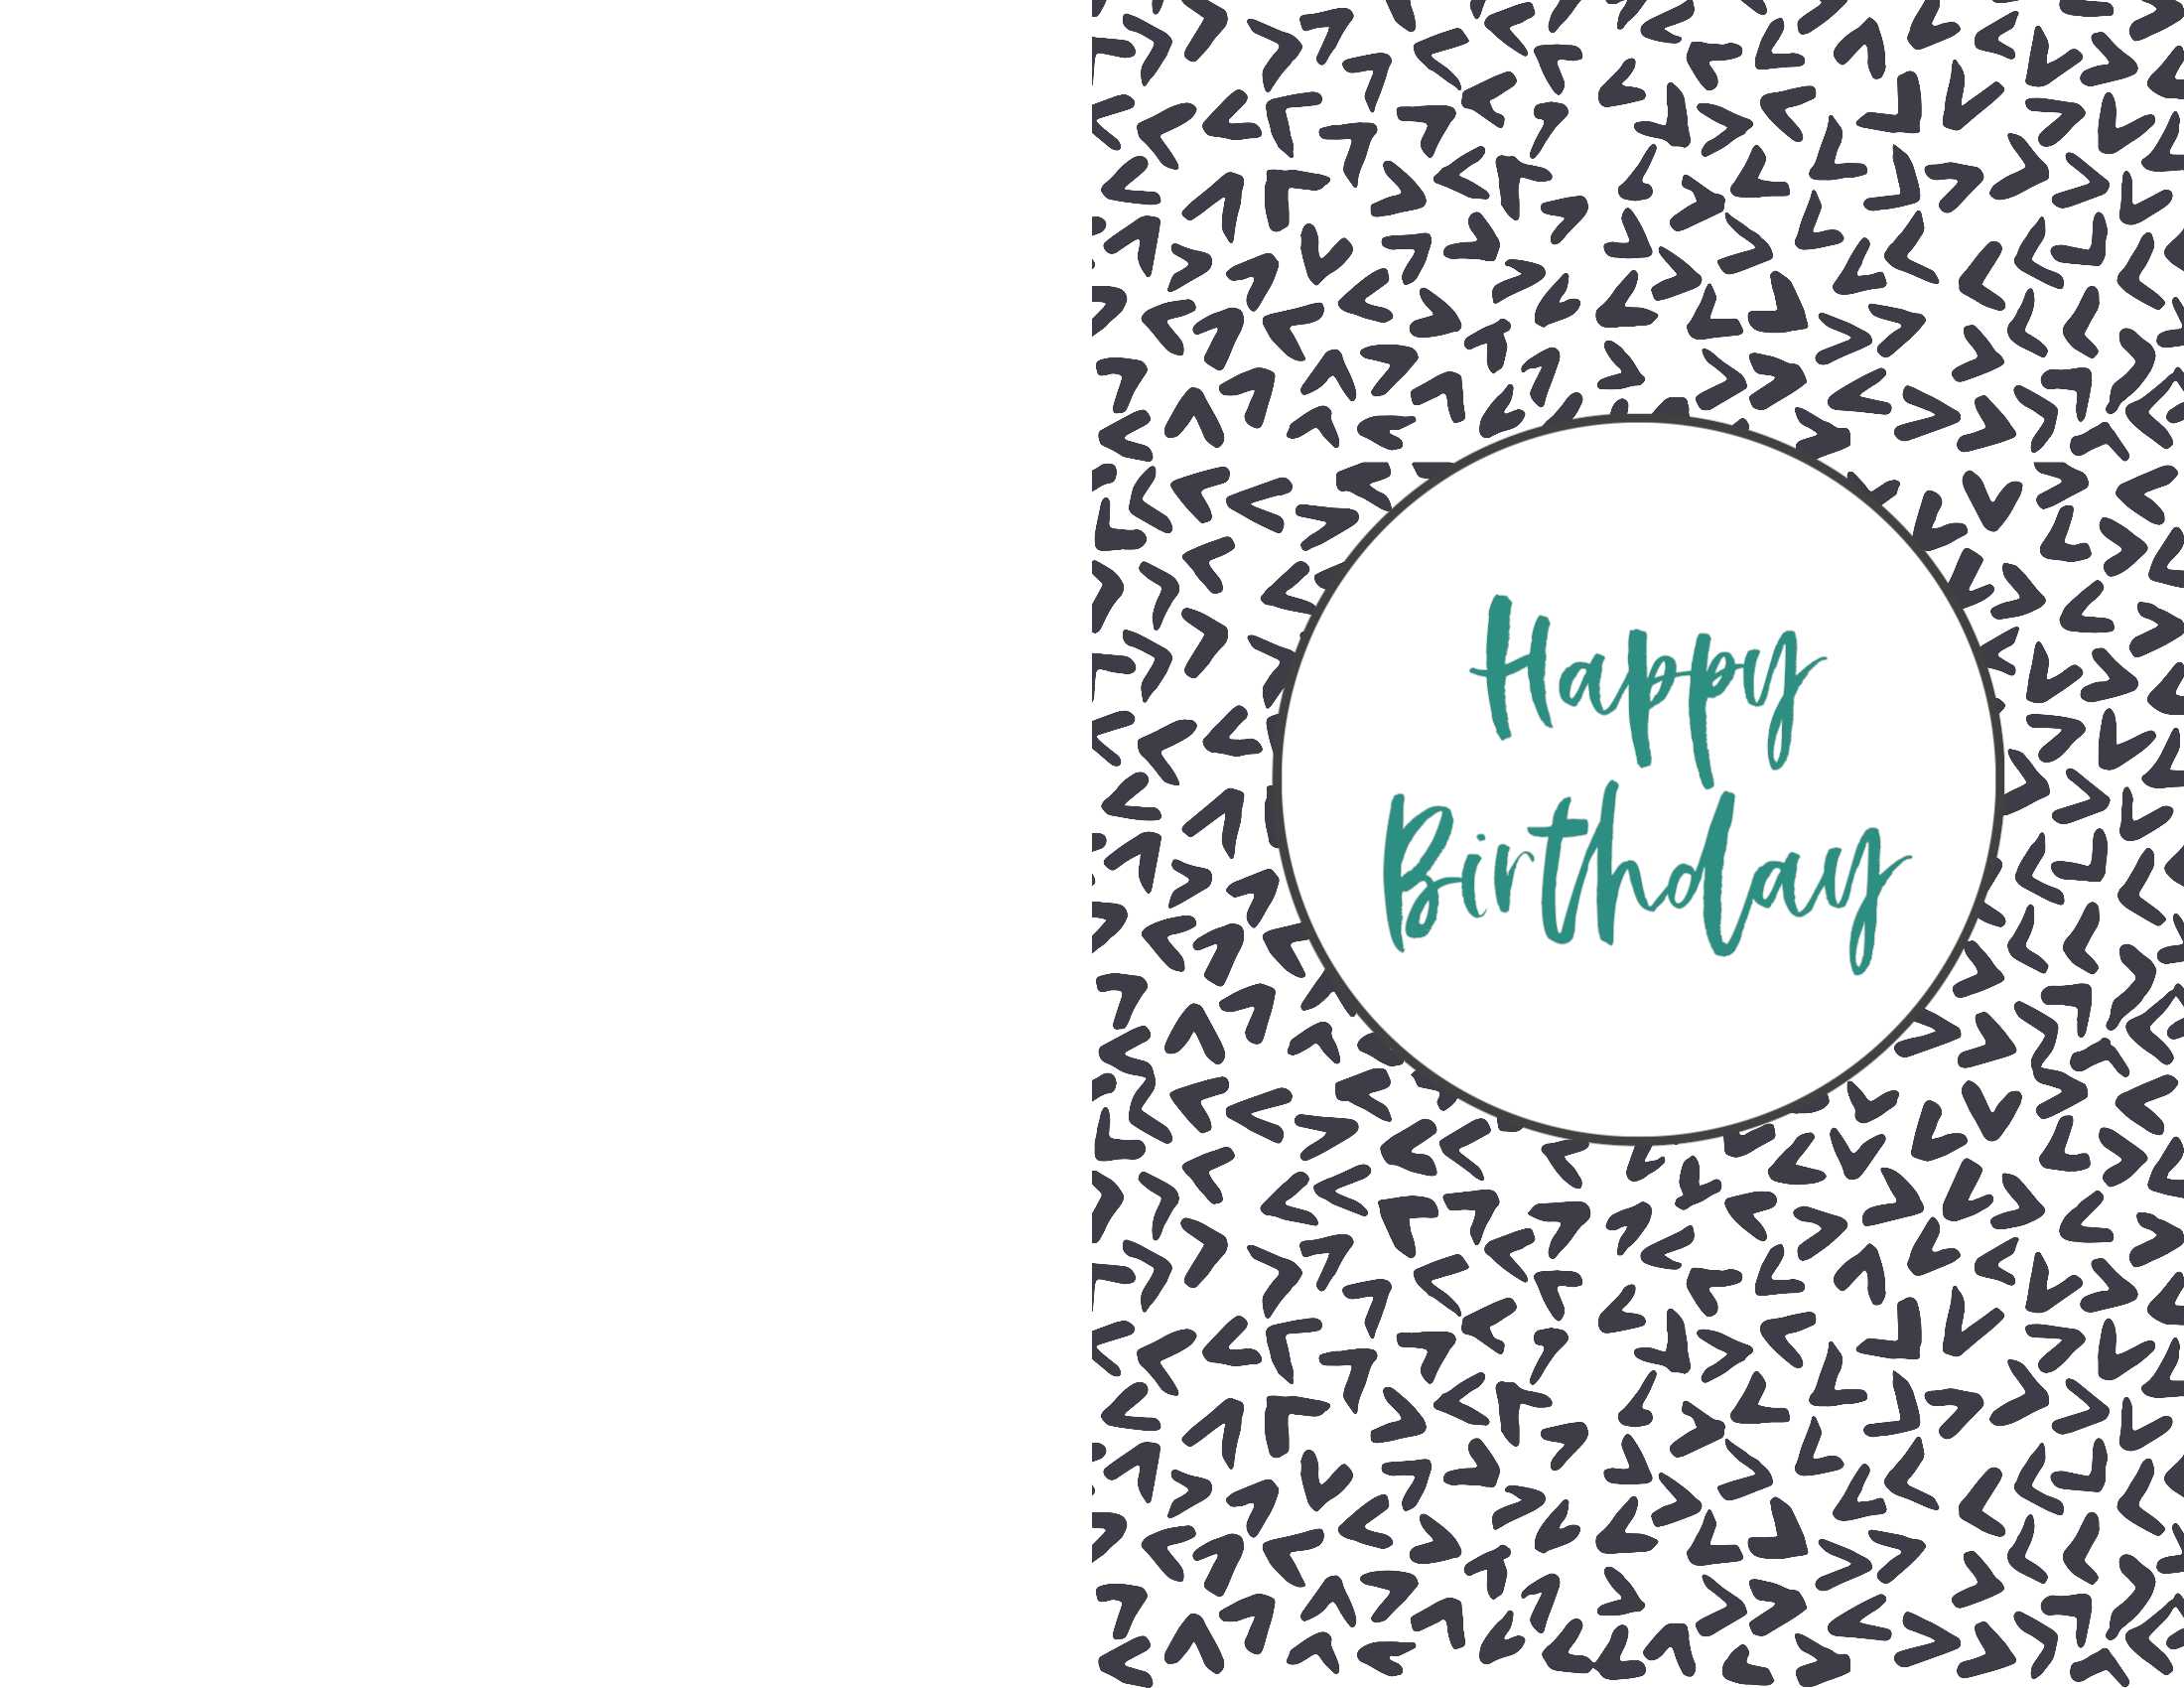 Free Printable Birthday Cards - Paper Trail Design Throughout Foldable Birthday Card Template